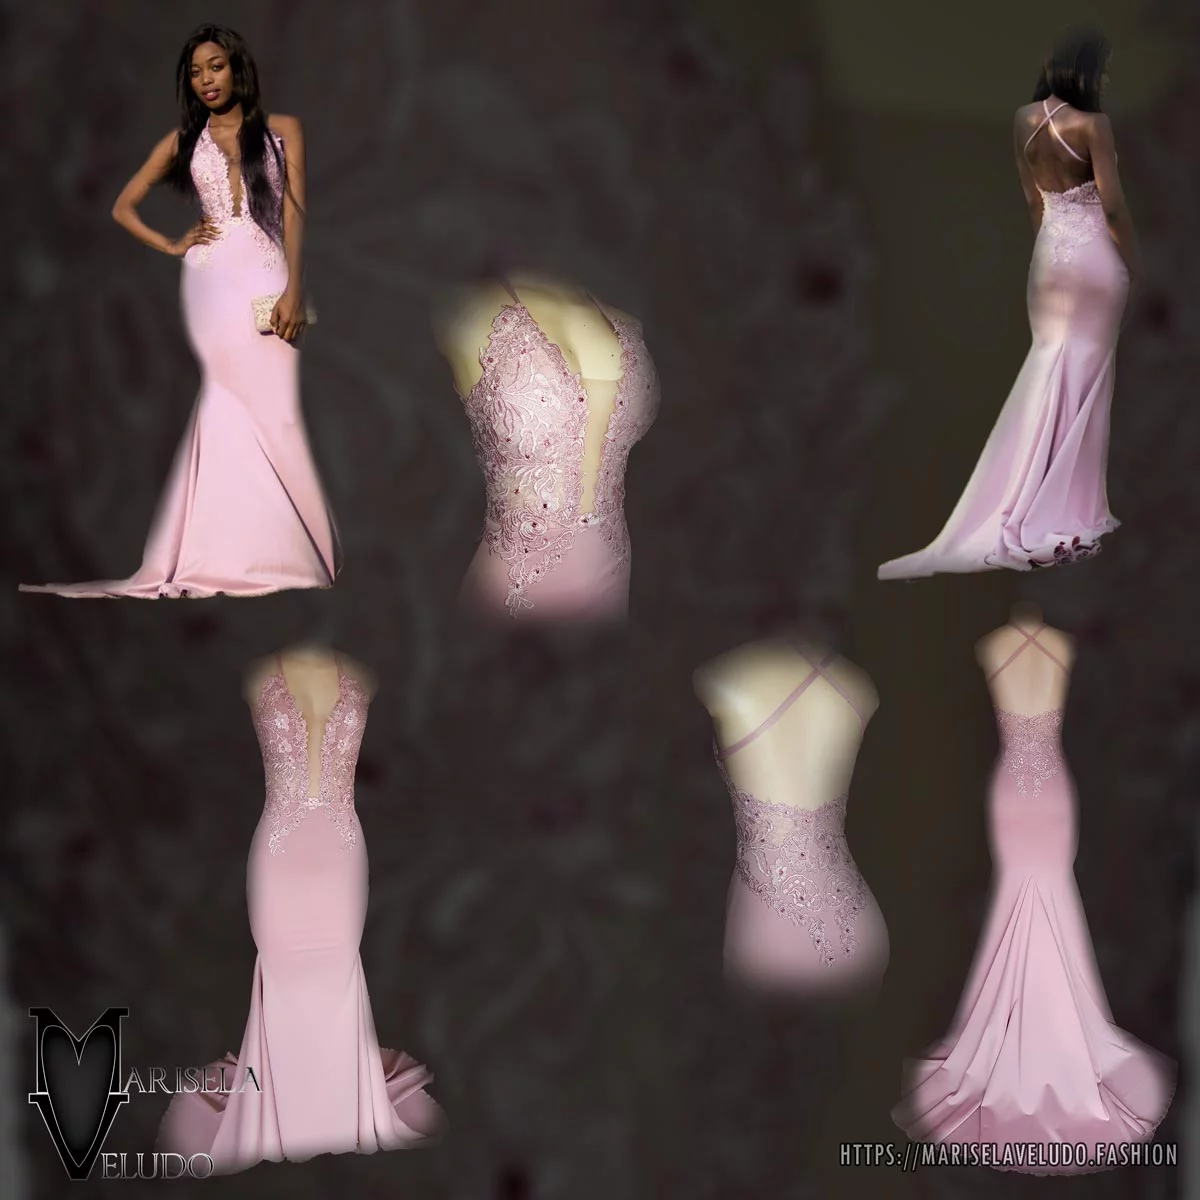 Pink sexy soft mermaid matric dance dress 8 look ravishing on your prom night with this pink sexy soft mermaid pink sexy soft mermaid matric dance dress. A fitted lace bodice with a plunging neckline, low back and a train to add some glamour to your important event.